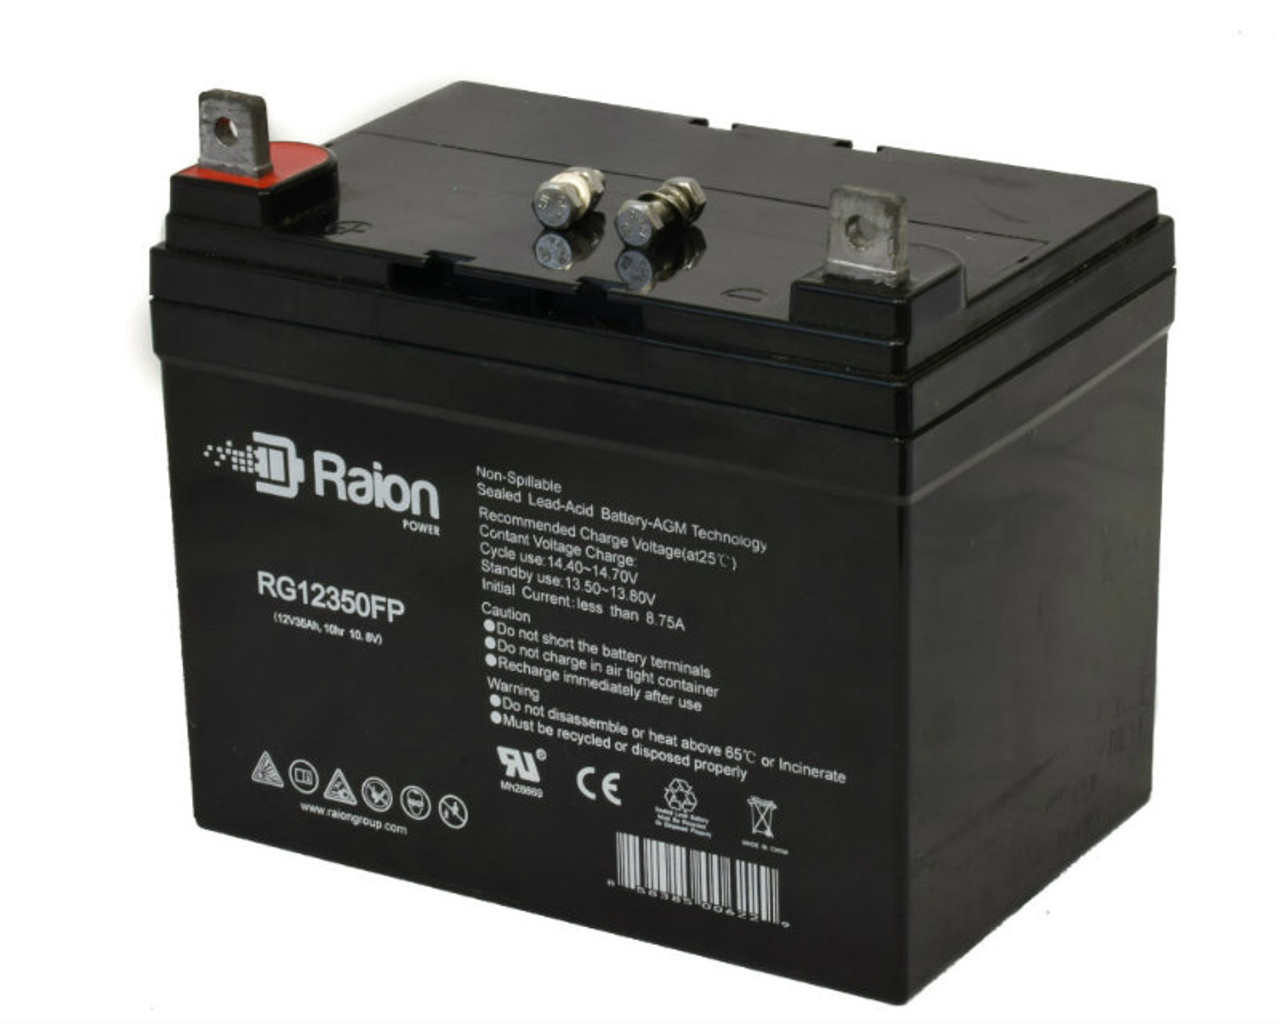 Raion Power Replacement 12V 35Ah RG12350FP Mobility Scooter Battery for Pillar Technology Powerchair